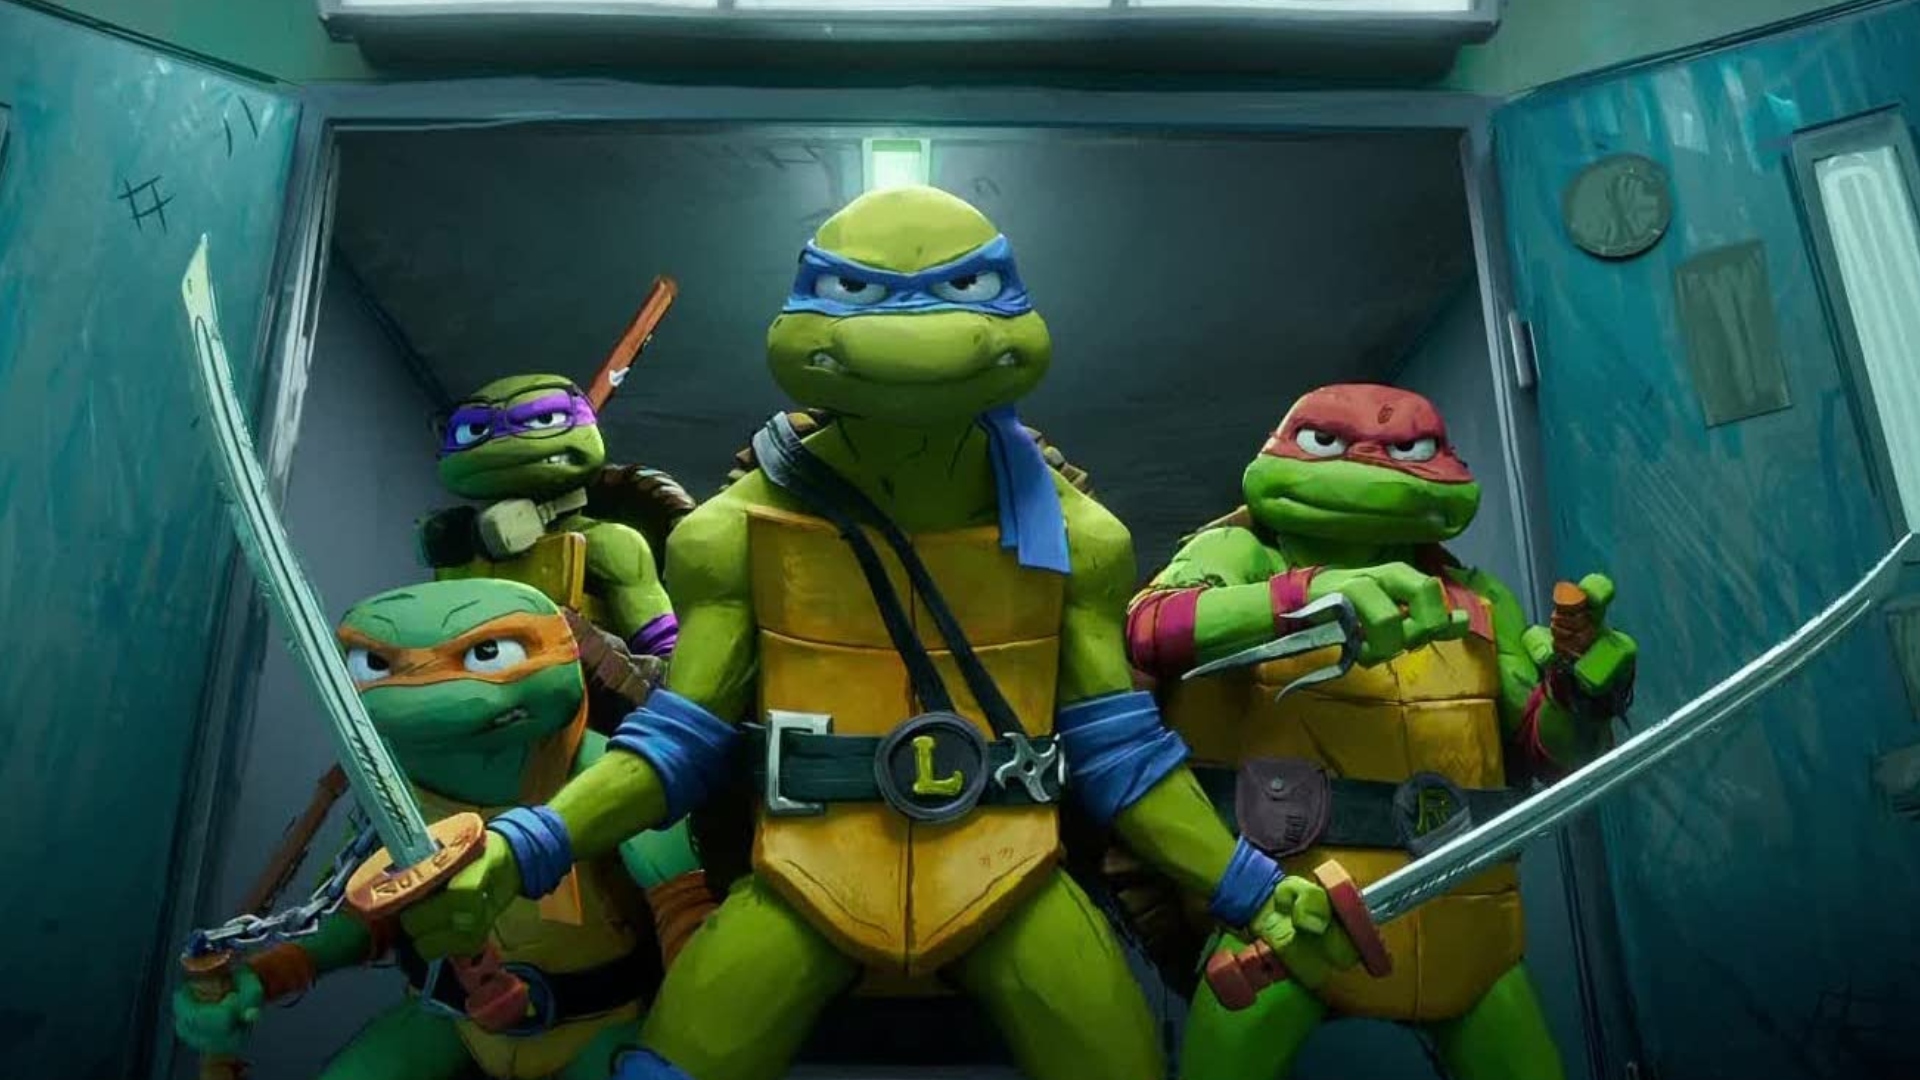 How's everyone hunting going for the new Mutant Mayhem figures? : r/TMNT